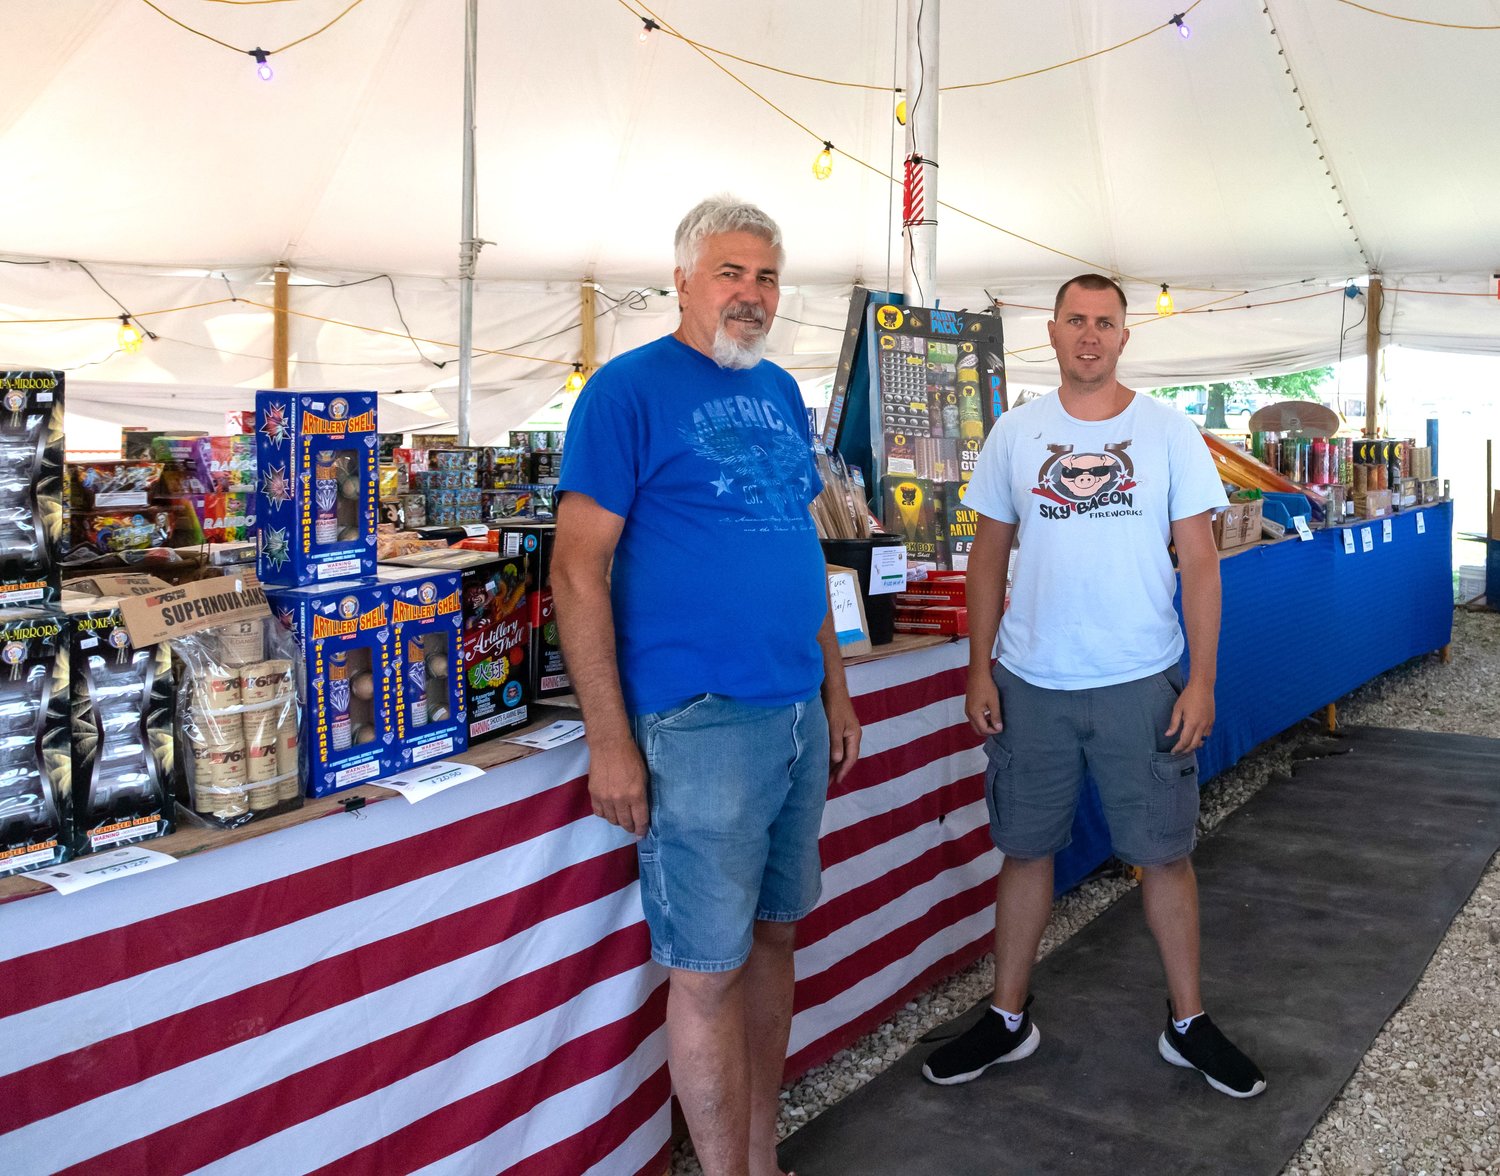 Steve Kelly and his son Jared stand amid the fireworks they sell at Kelly Brothers Fireworks in Moberly. Jared and his brothers grew up working the family fireworks stand each Fourth of July holiday season.